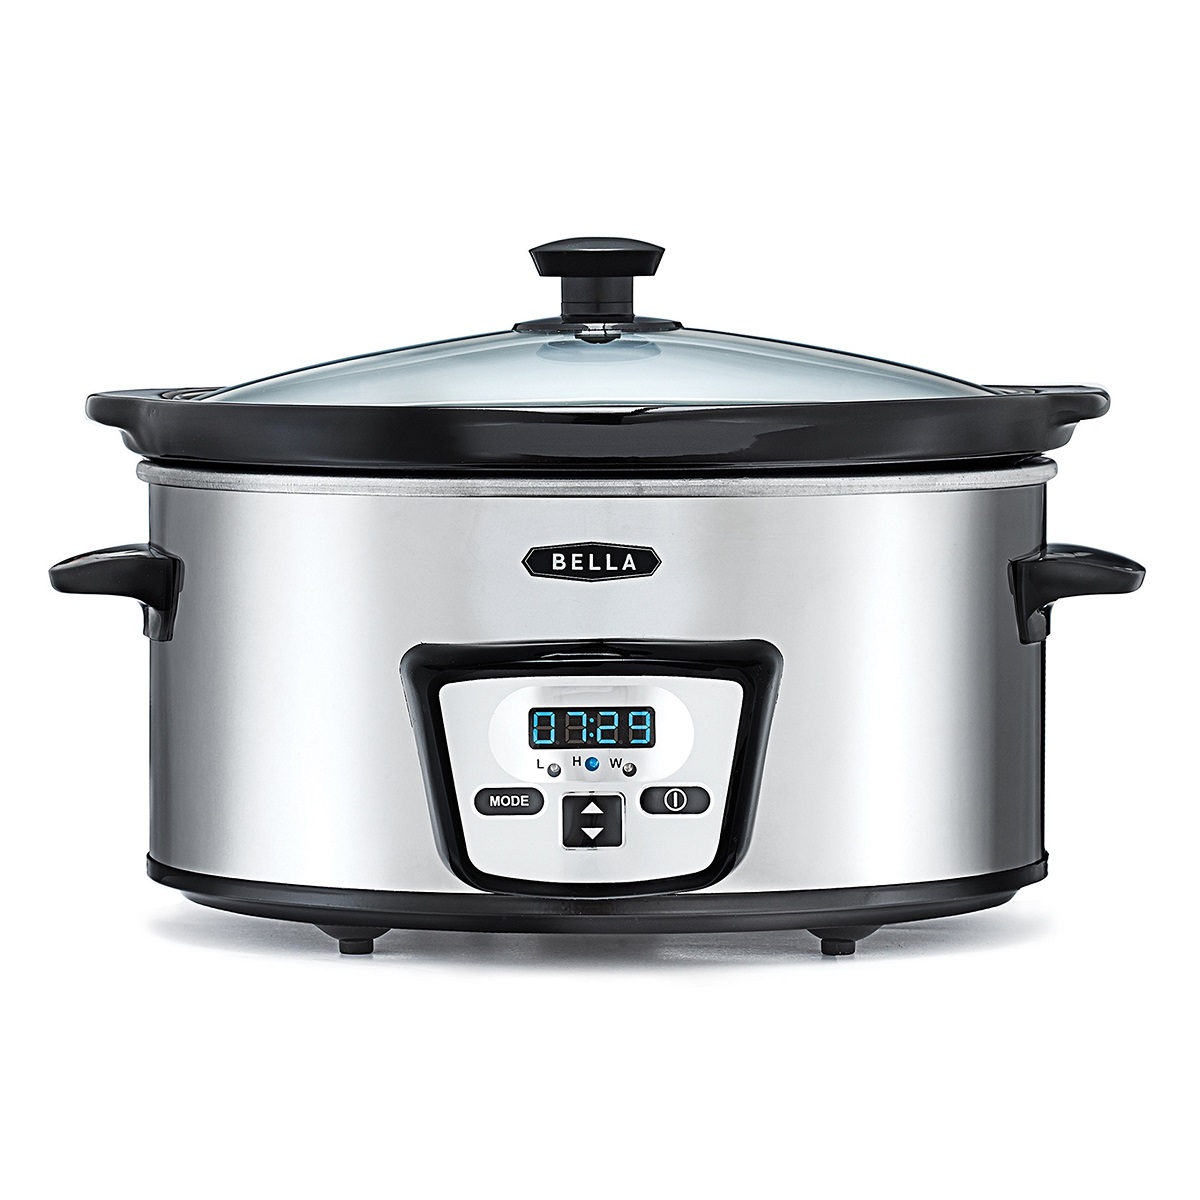 https://storables.com/wp-content/uploads/2023/08/11-incredible-bella-13973-5-quart-programmable-polished-stainless-steel-slow-cooker-for-2023-1693362021.jpg